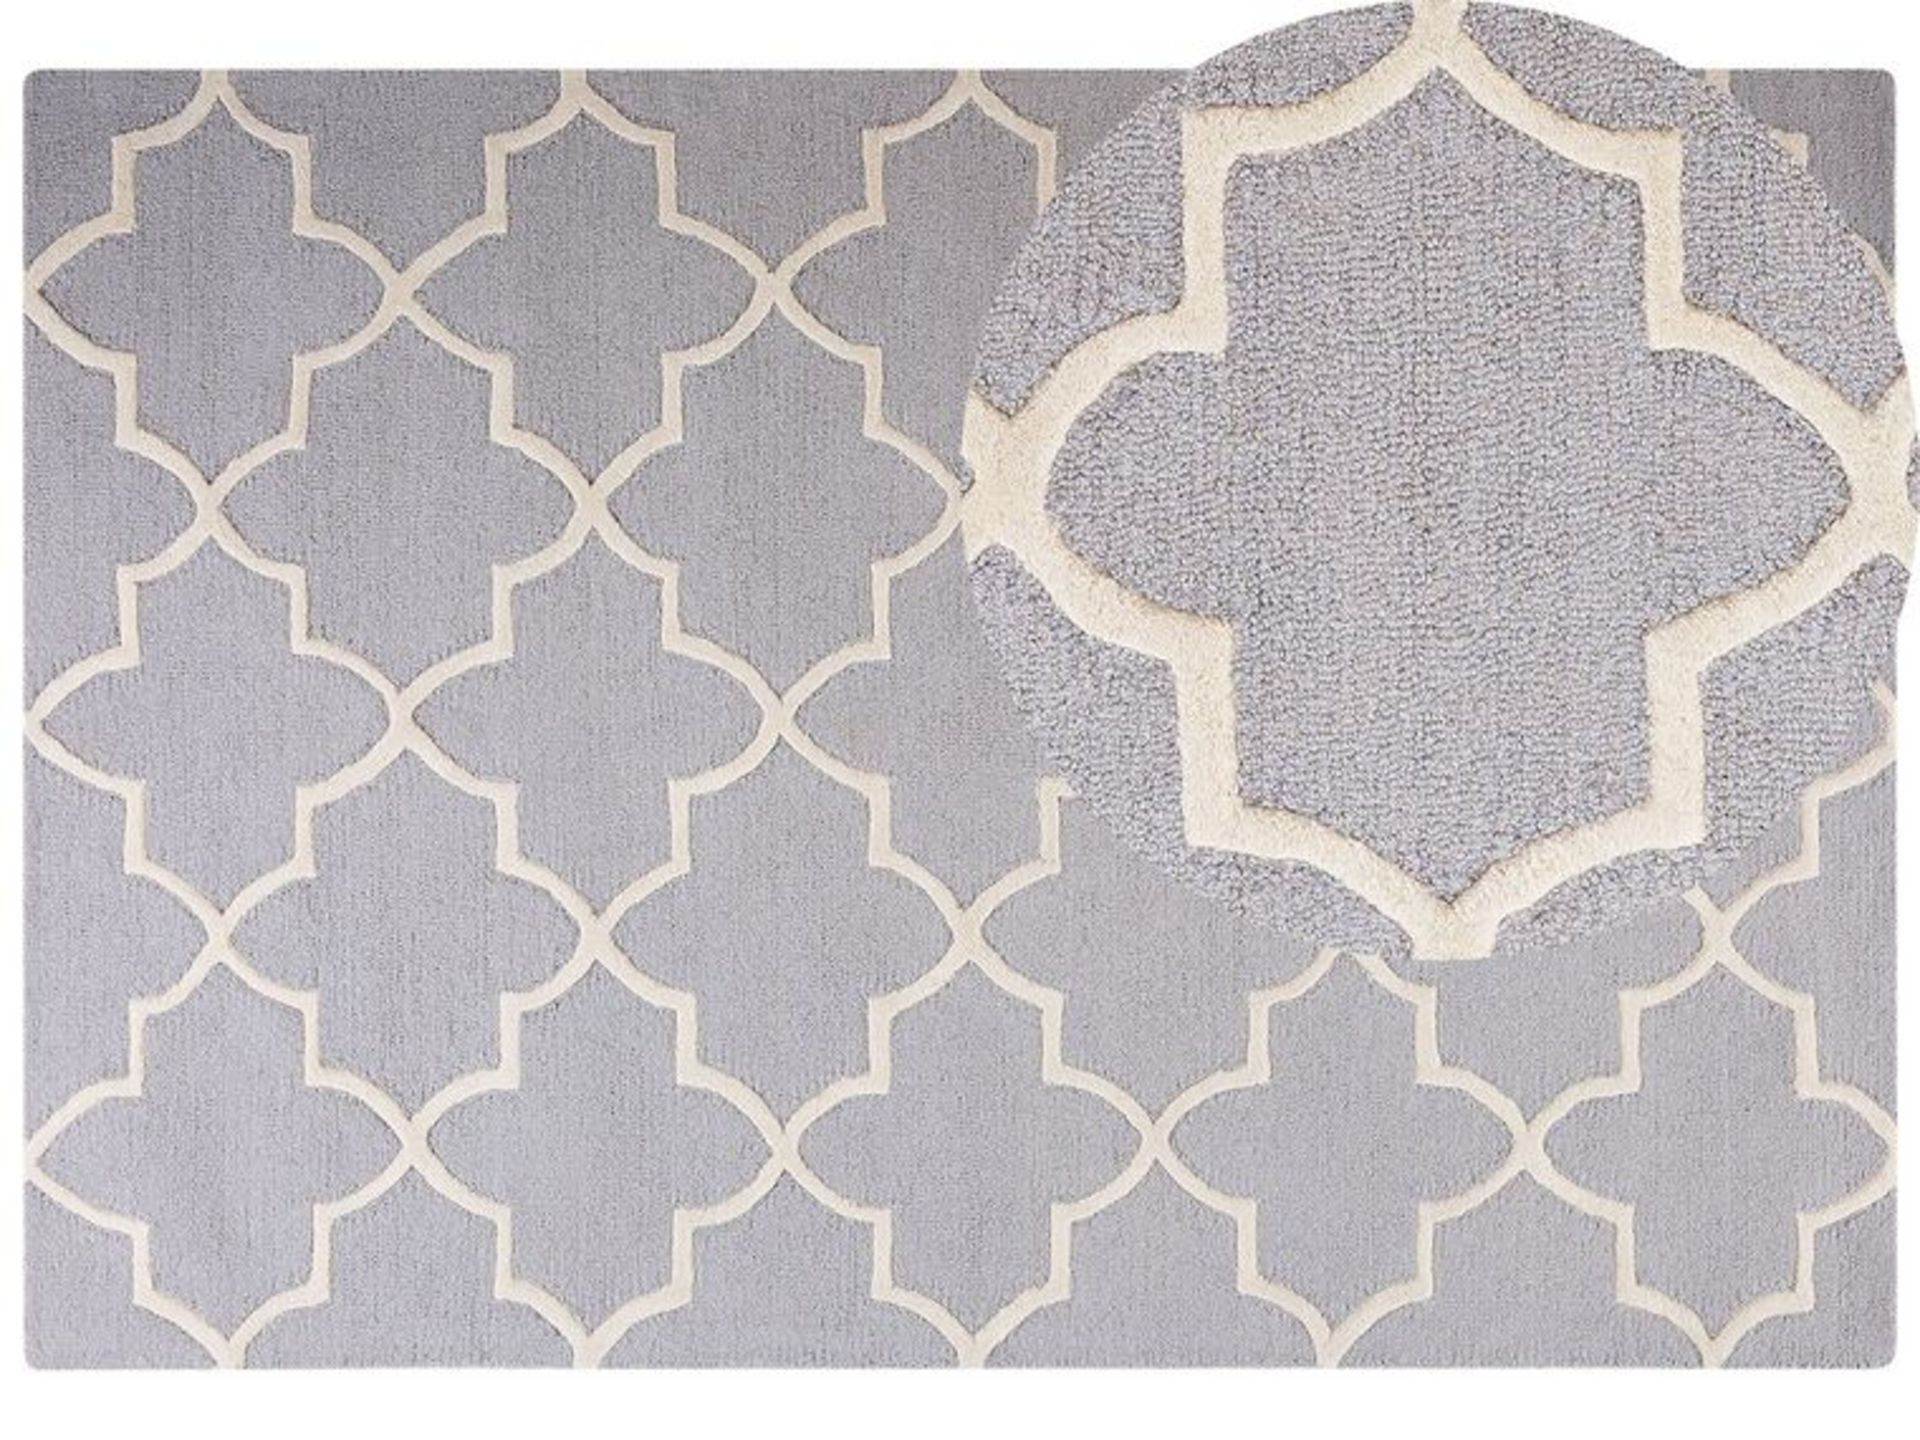 Silvan Wool Area Rug 160 x 230 cm Grey. - R13a.9. Luxurious and plush, the rug provides an